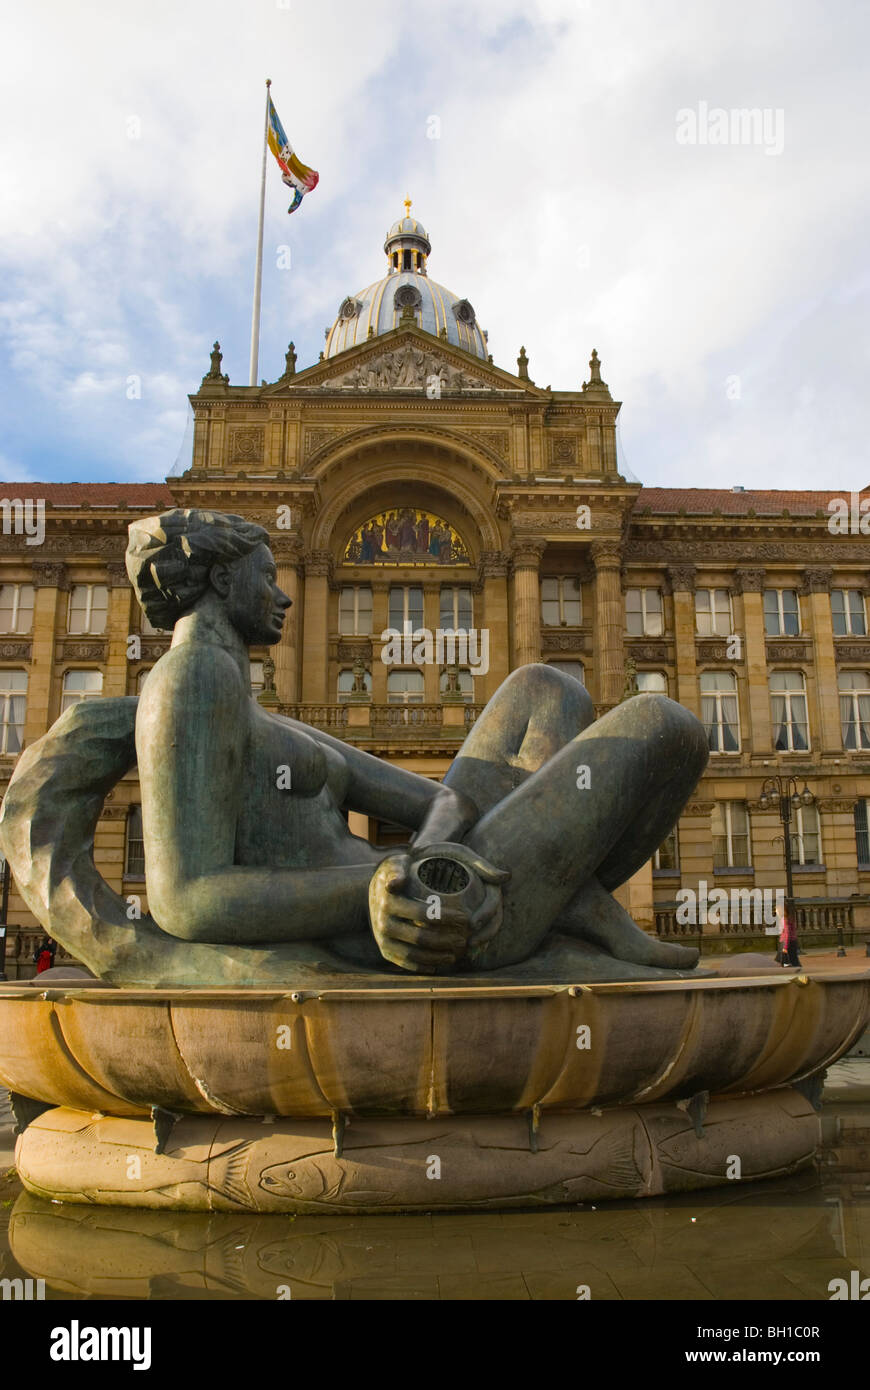 Victoria square with the fountain of bathing woman in central Birmingham England UK Europe Stock Photo